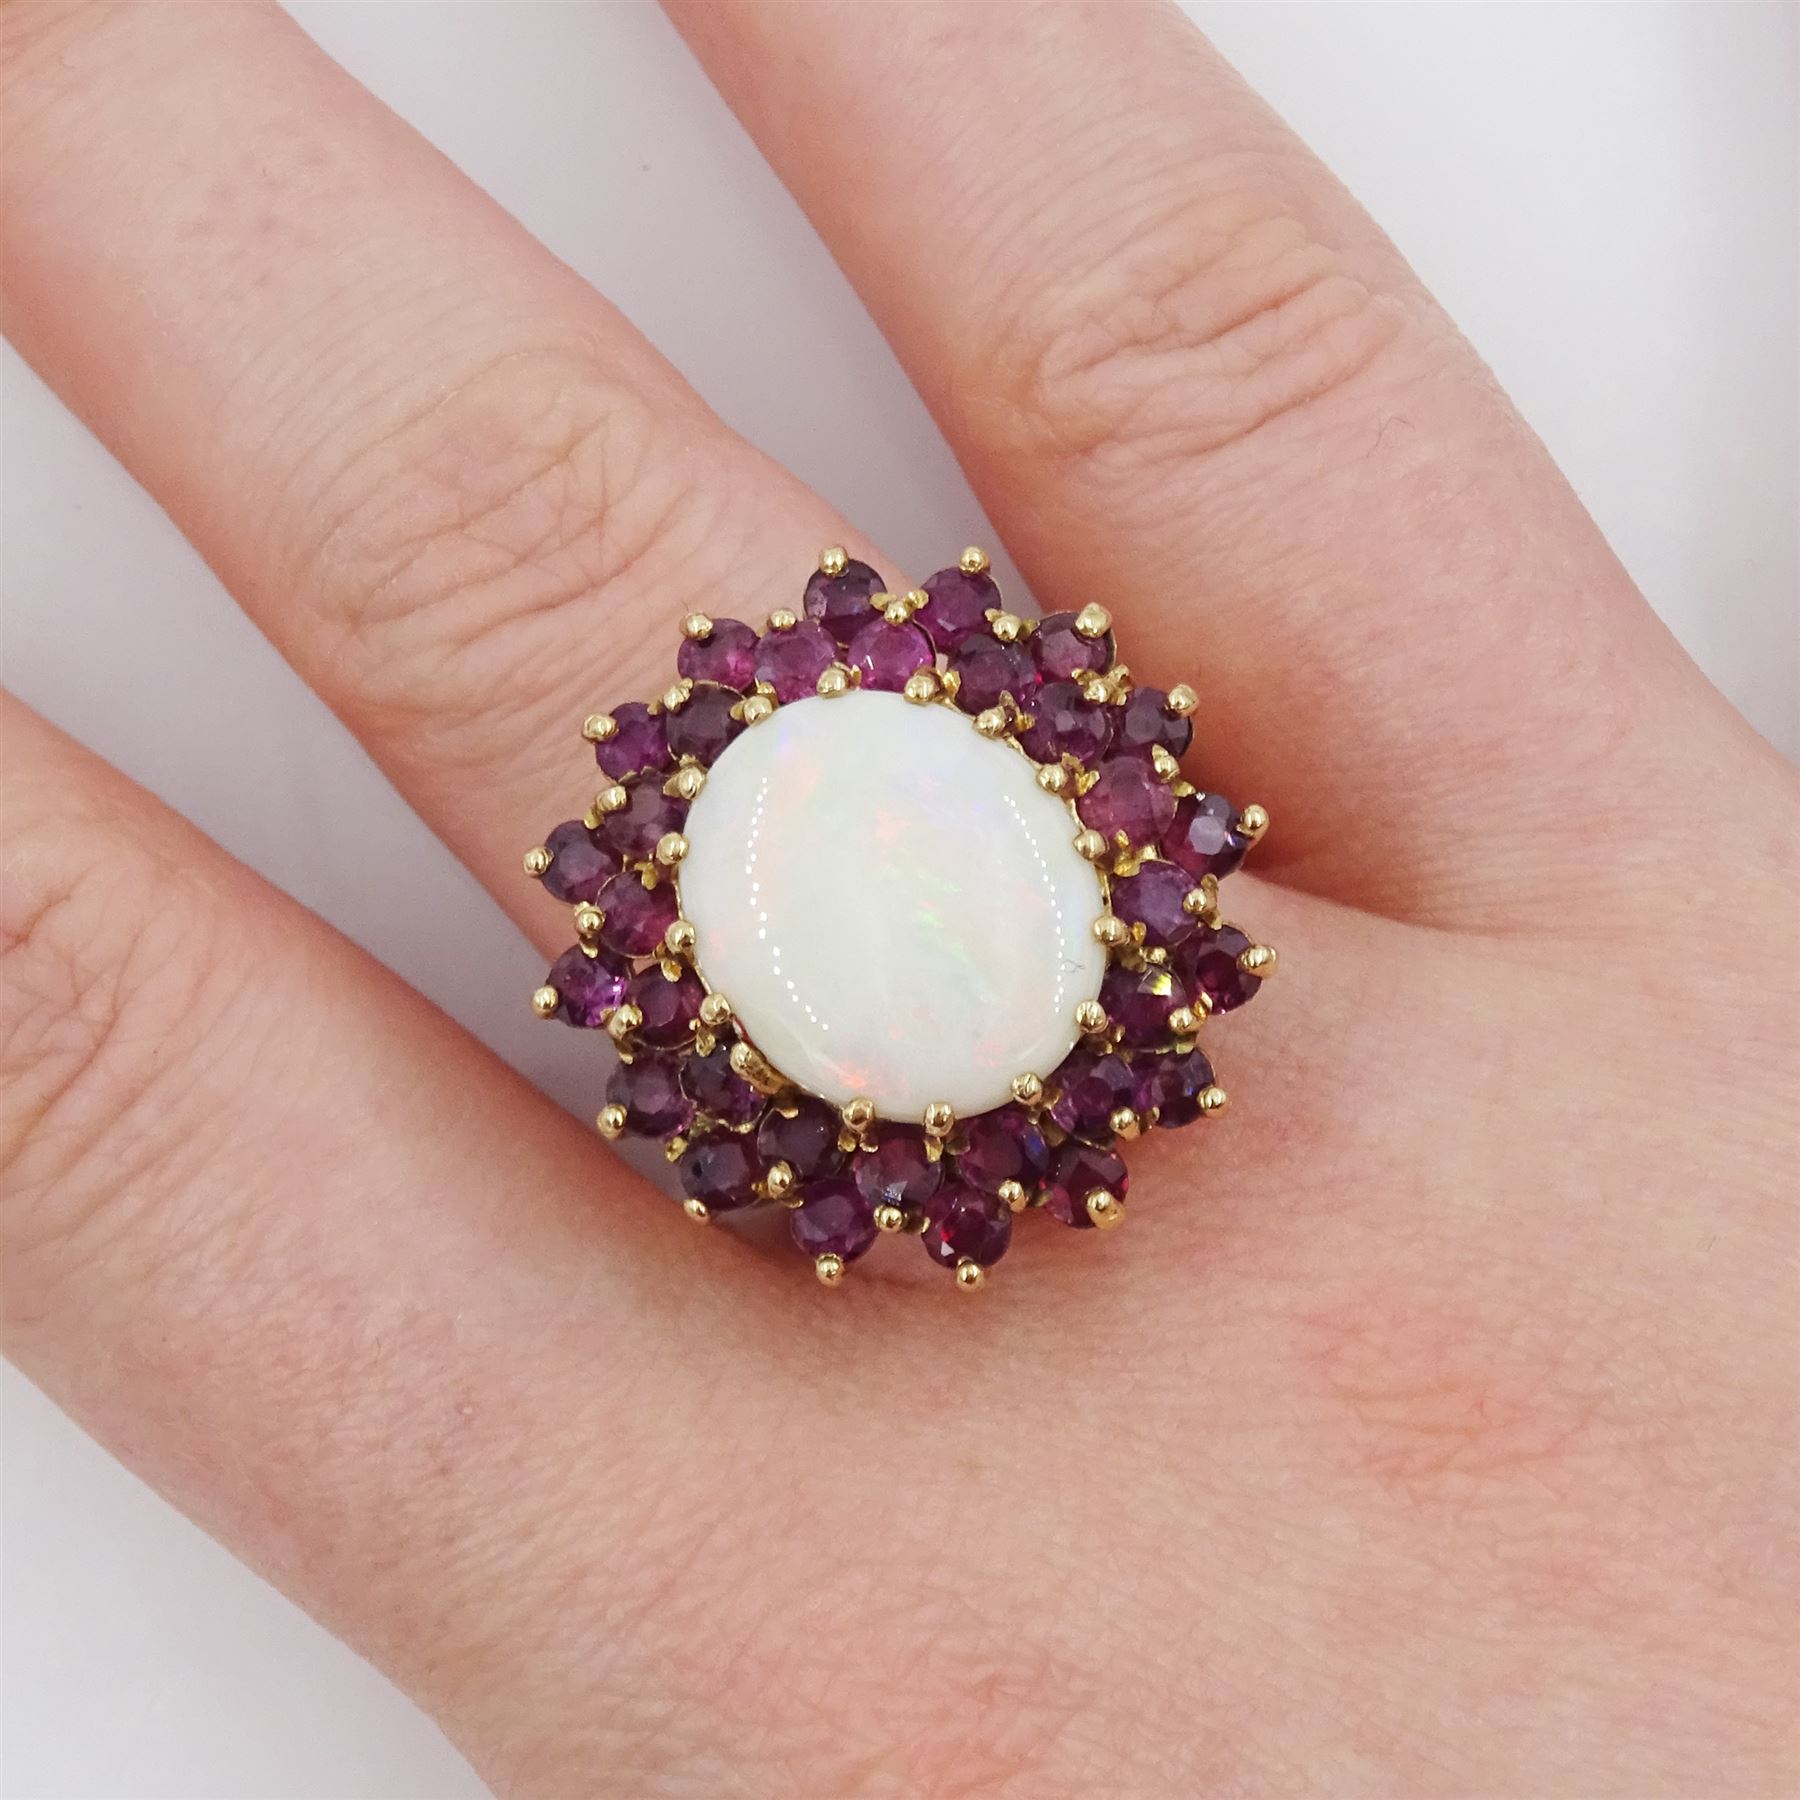 9ct gold opal and garnet cluster ring - Image 2 of 4